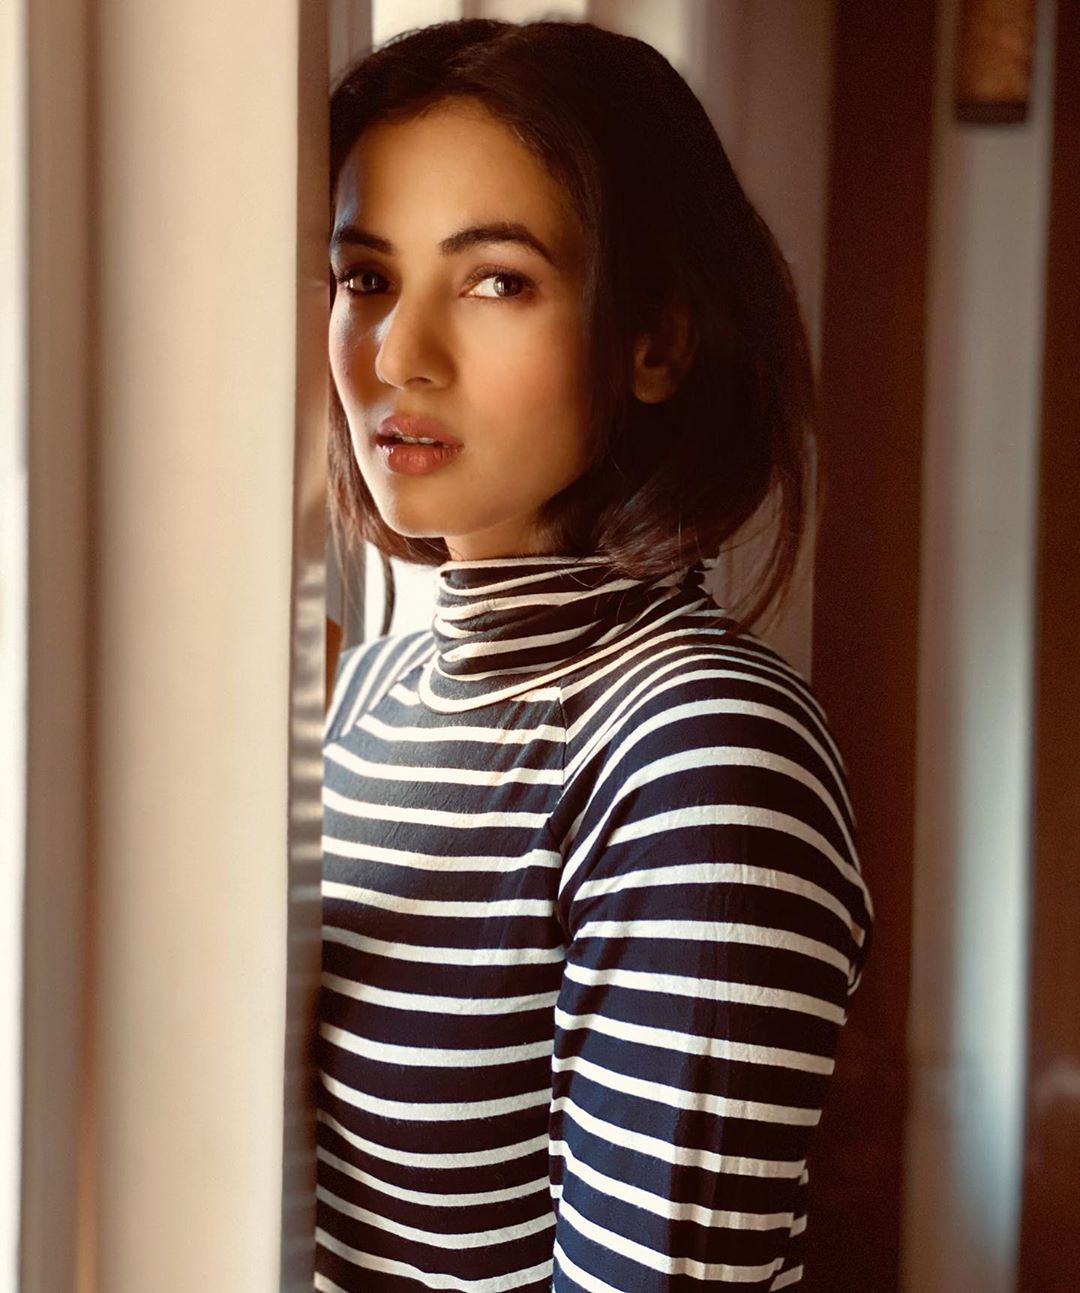 Sonal chauhan 14 hottest pics, sonal chauhan 14 instagram